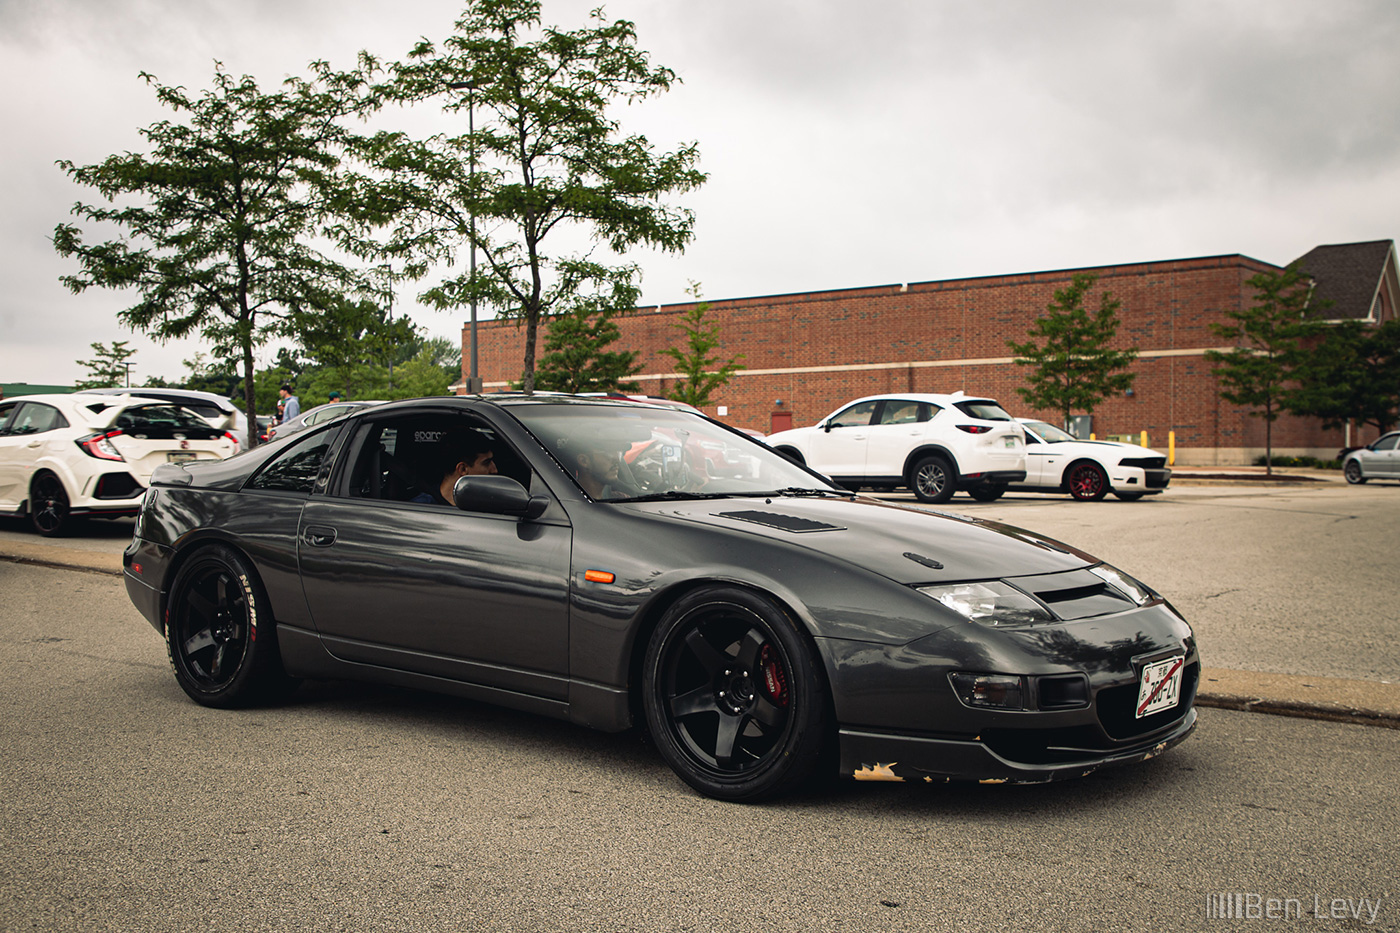 Grey Nissan 300ZX with an LS Swap